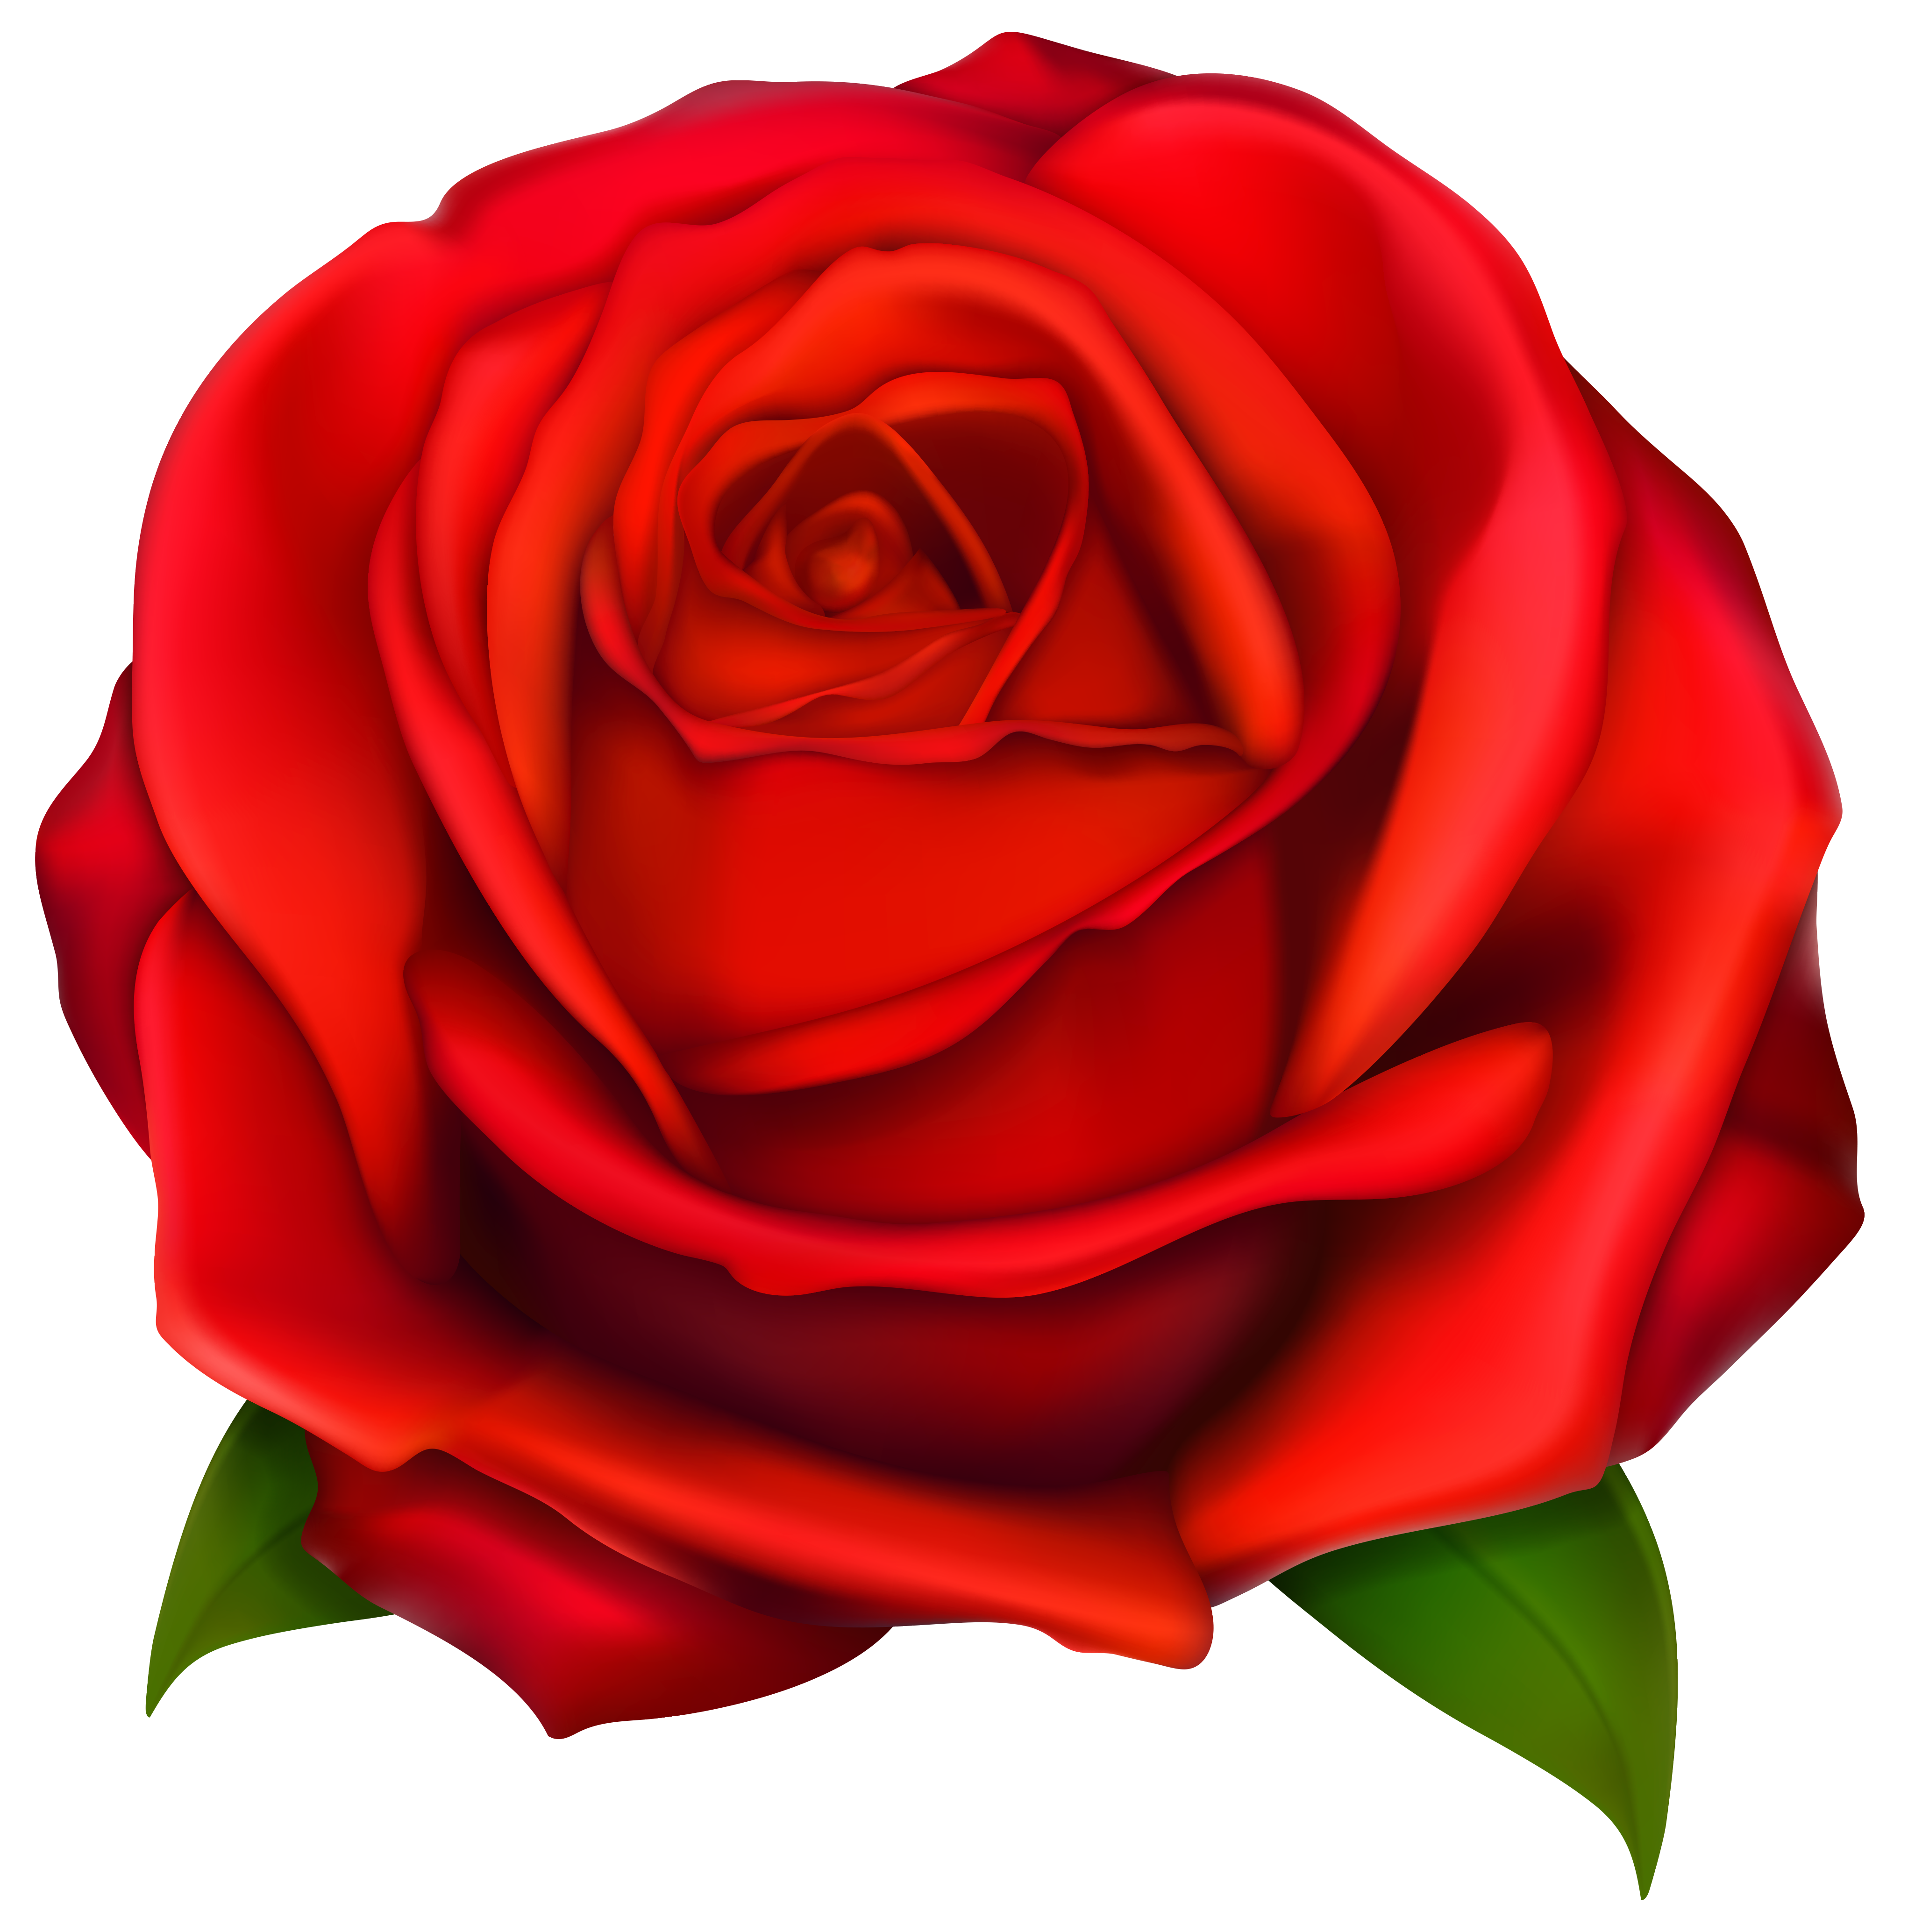 Image Of Red Rose 2 Red Roses Clipart